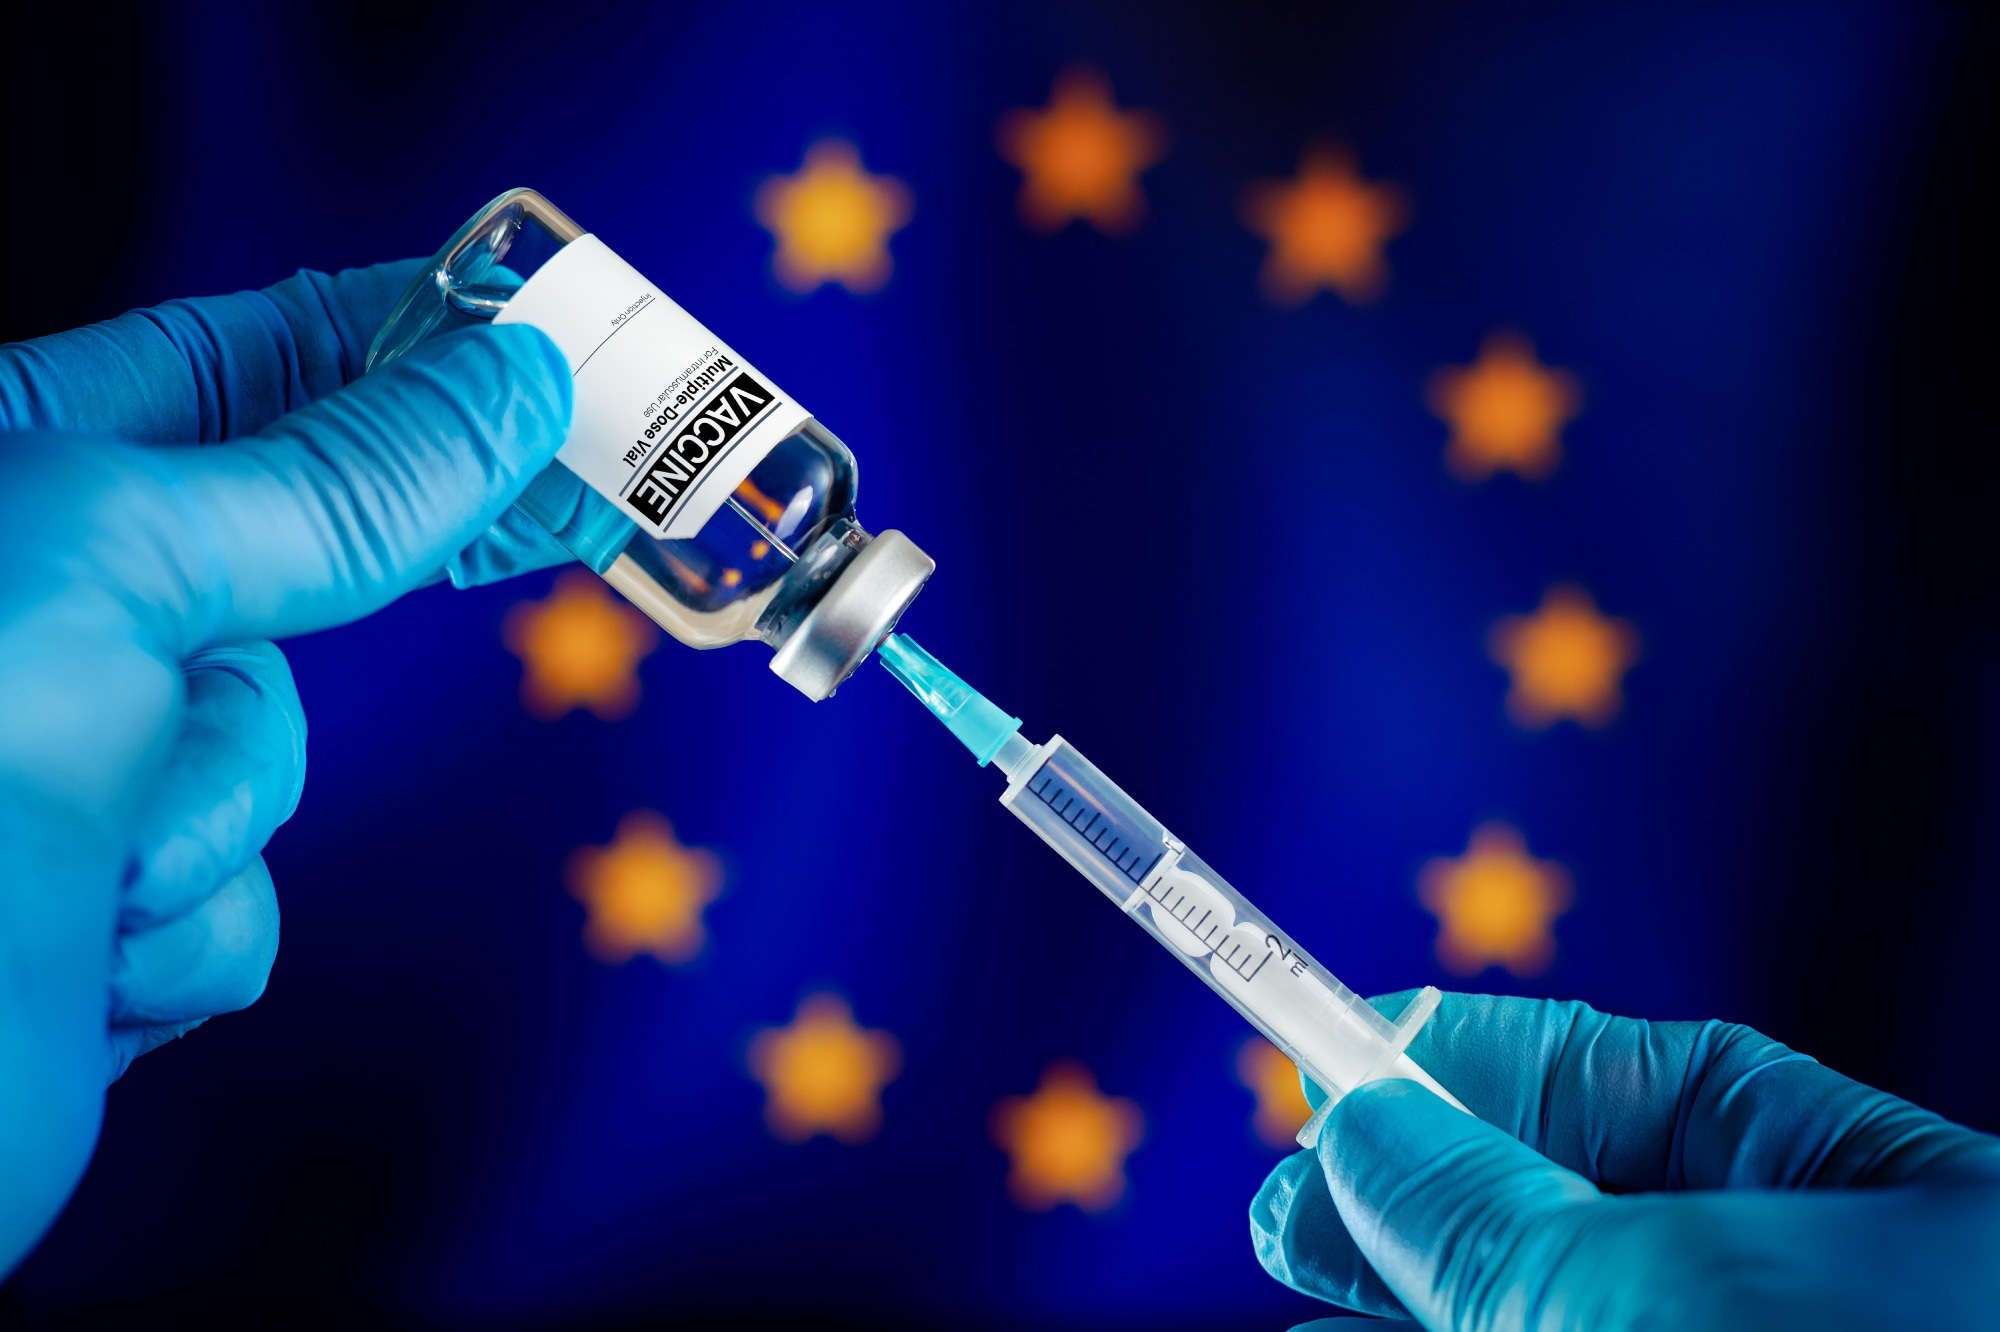 Study: Estimated number of lives directly saved by COVID-19 vaccination programs in the WHO European Region, December 2020 to March 2023. Image Credit: angellodeco / Shutterstock